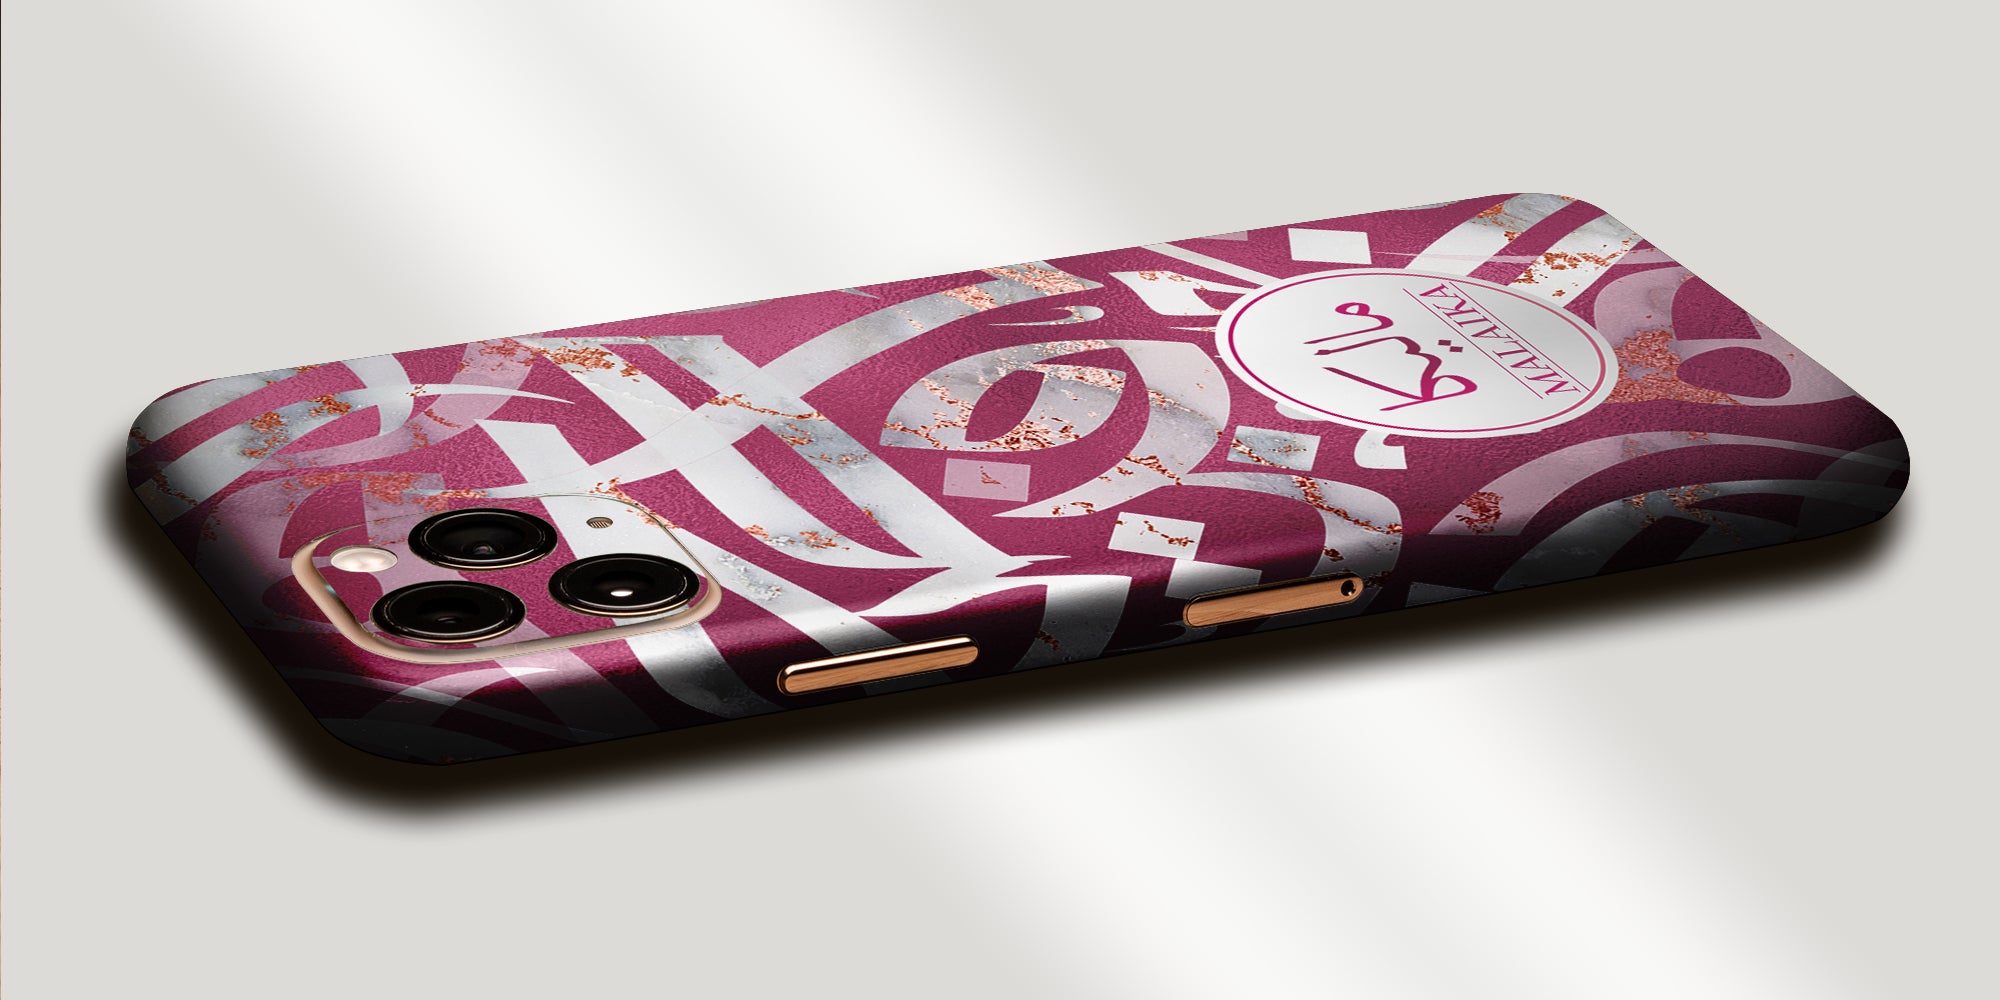 Arabic Calligraphy by Asad Decal Skin With Personalised Arabic Name Phone Wrap  - Pink